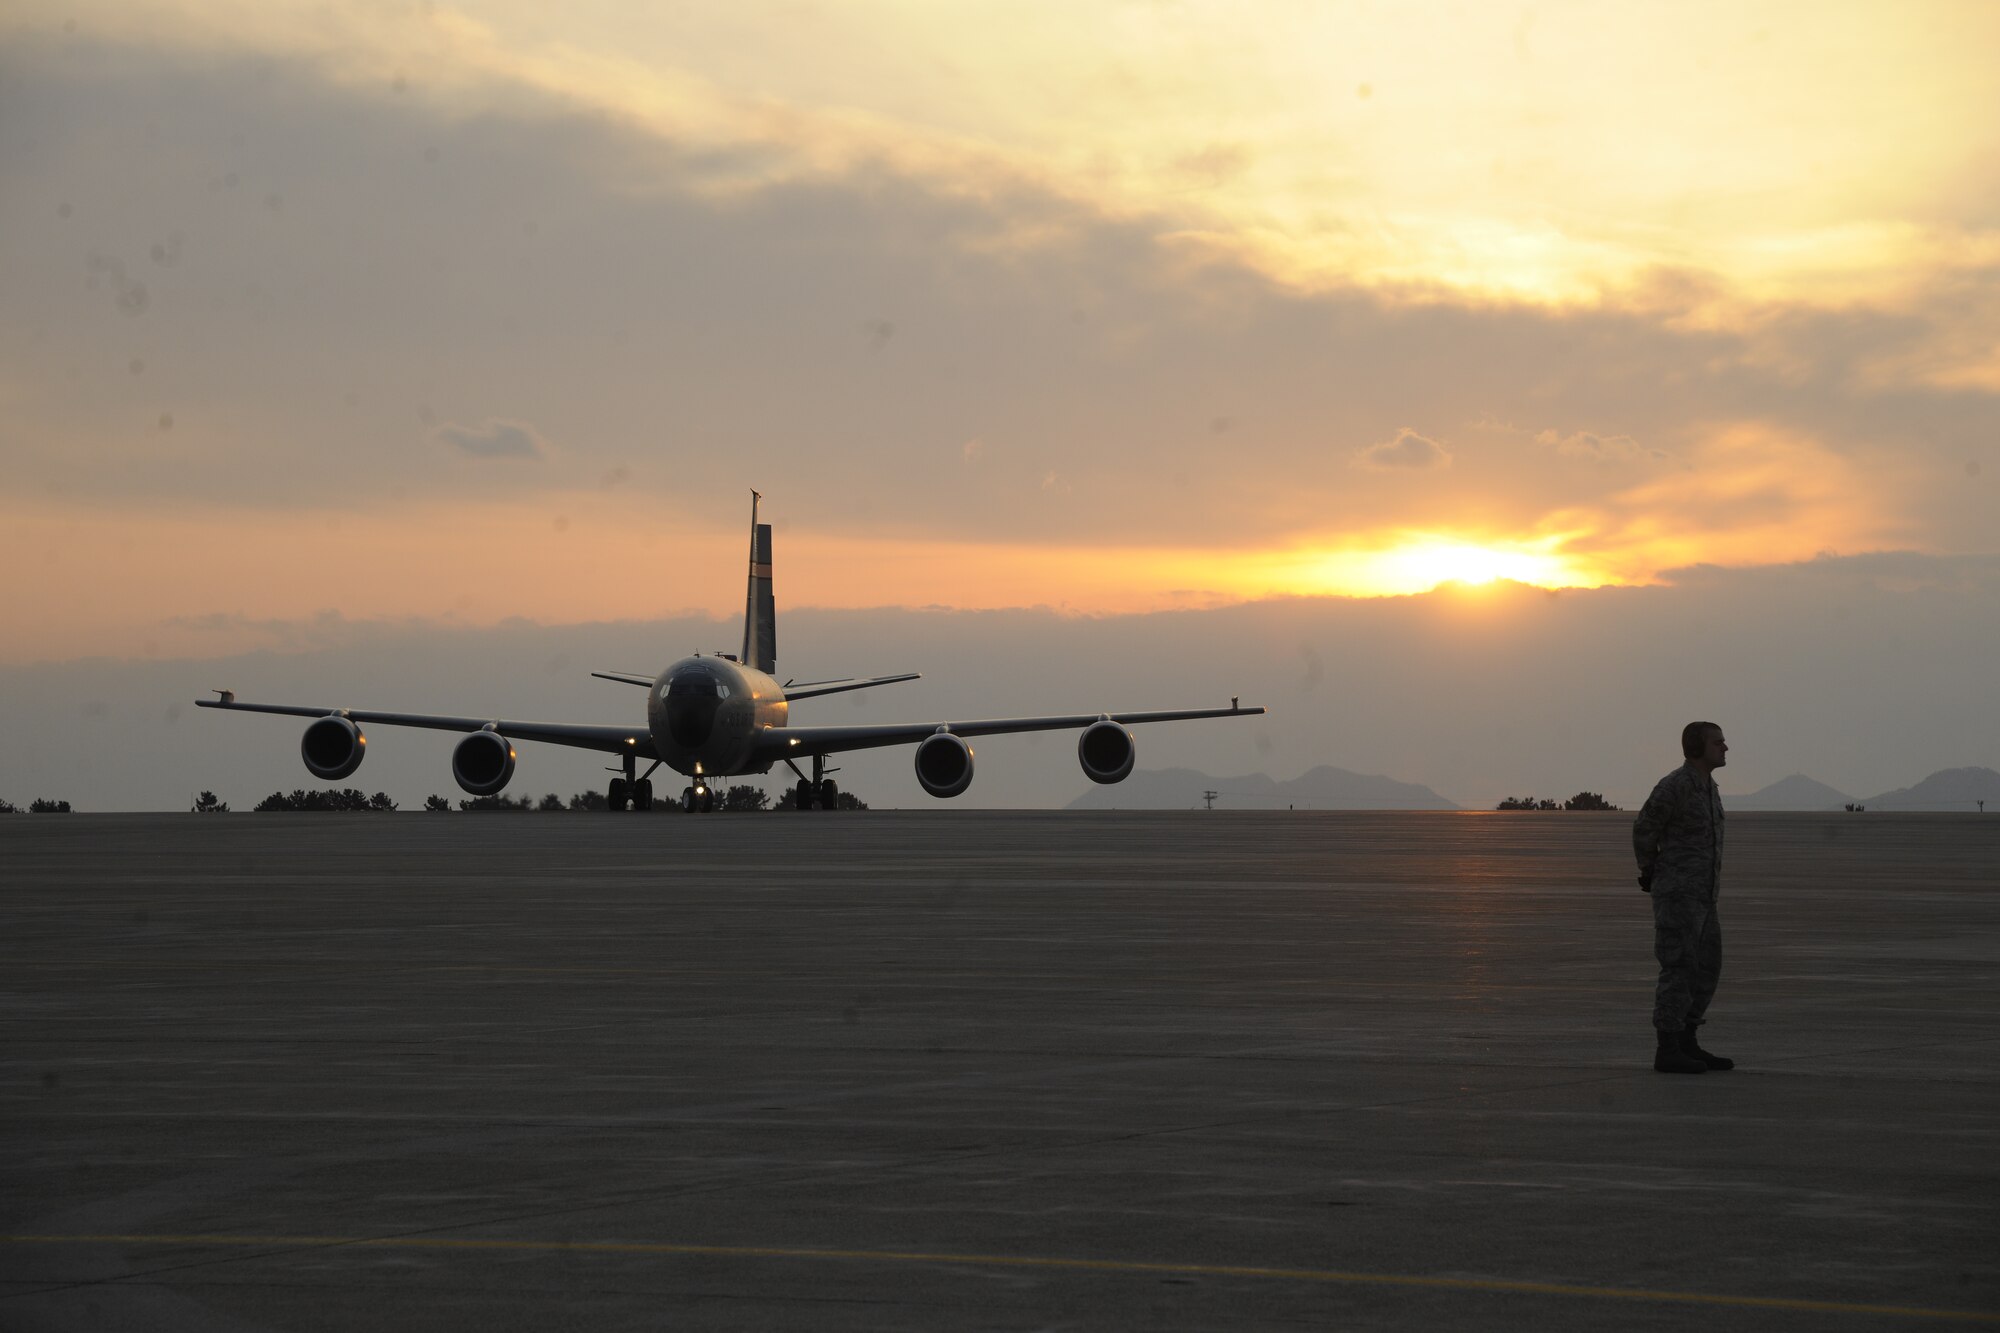 A KC-135 Stratotanker carrying Air Force Chief of Staff Gen. Norton Schwartz taxis to base operations at Kunsan Air Base, Republic of Korea, Dec. 23, 2011. The general and his wife visited Kunsan during the holidays to spend time and spread holiday cheer to Airmen serving on a remote, one-year assignment on the Korean peninsula. (U.S. Air Force photo by Capt. Omar Villarreal/Released)